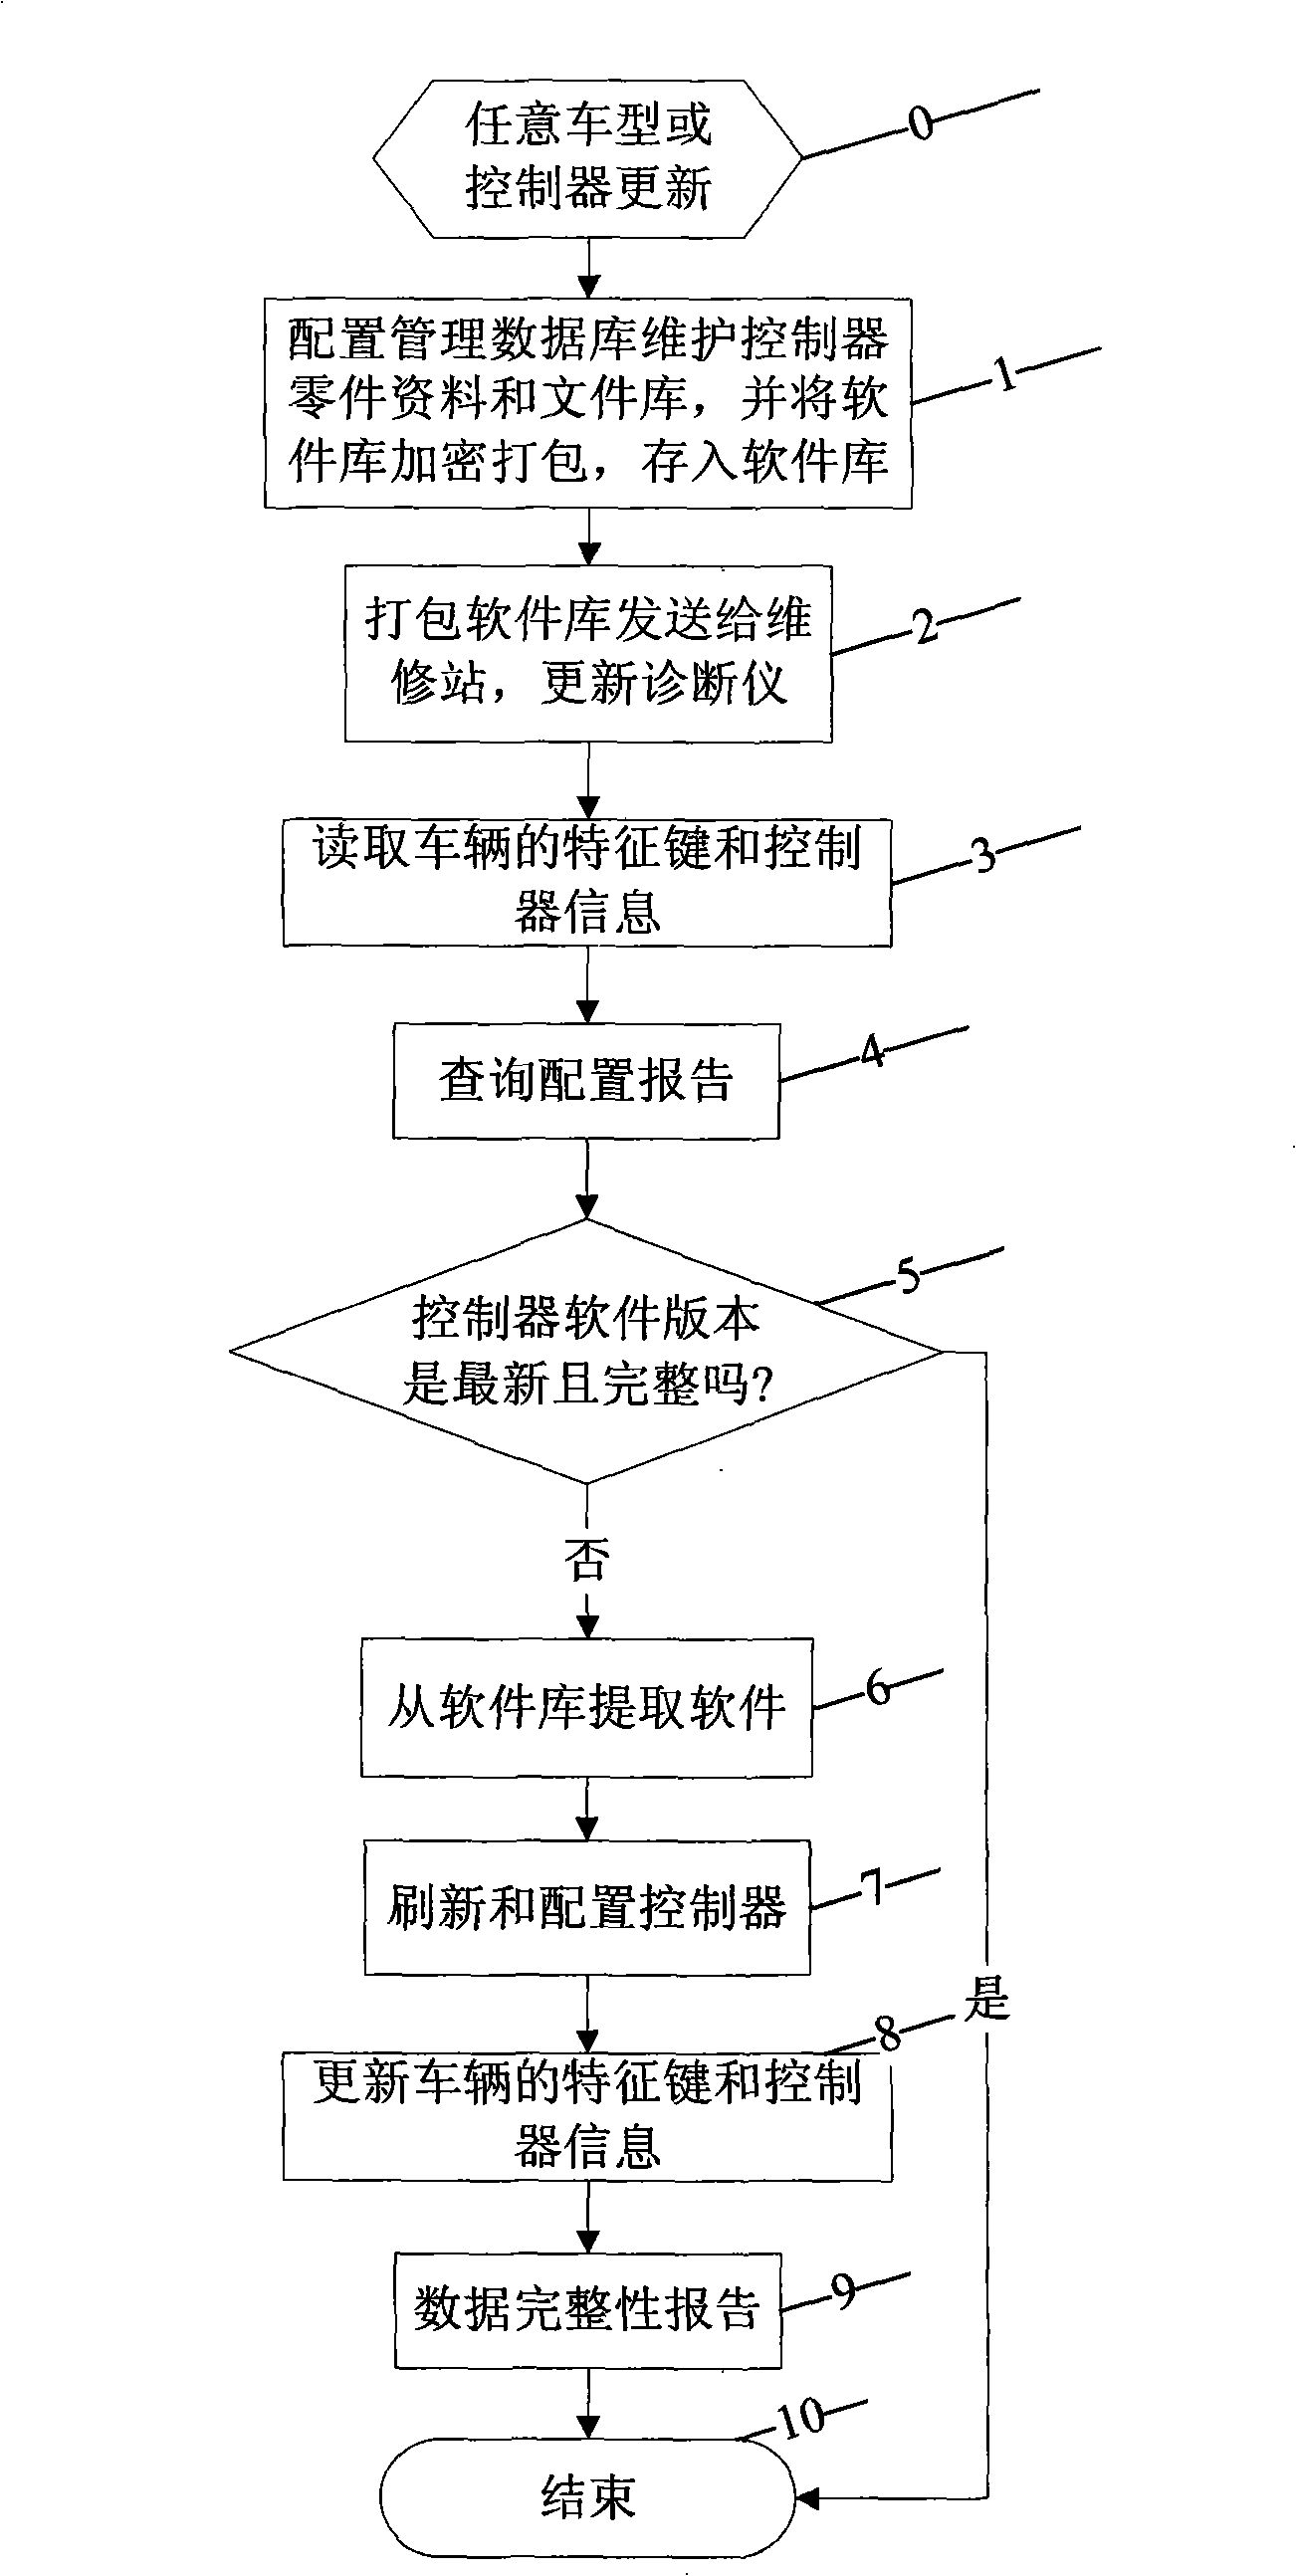 Vehicle diagnostic device calibration software configuration administrative system and method